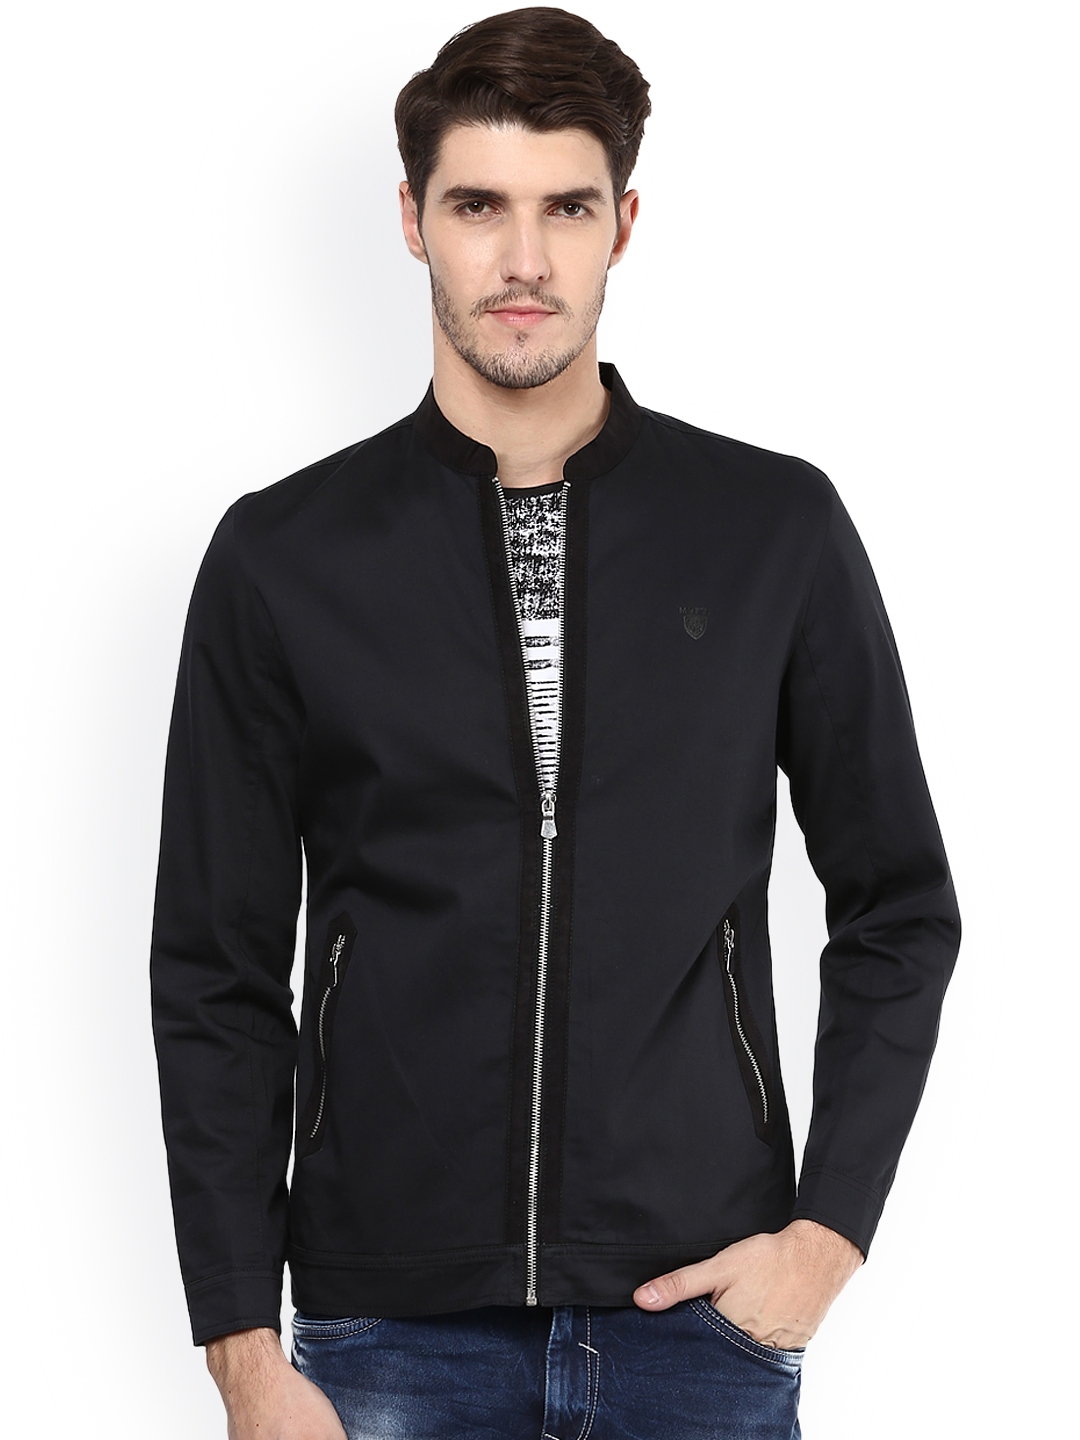 Buy Mufti Black Tailored Jacket - Jackets for Men 1606185 | Myntra